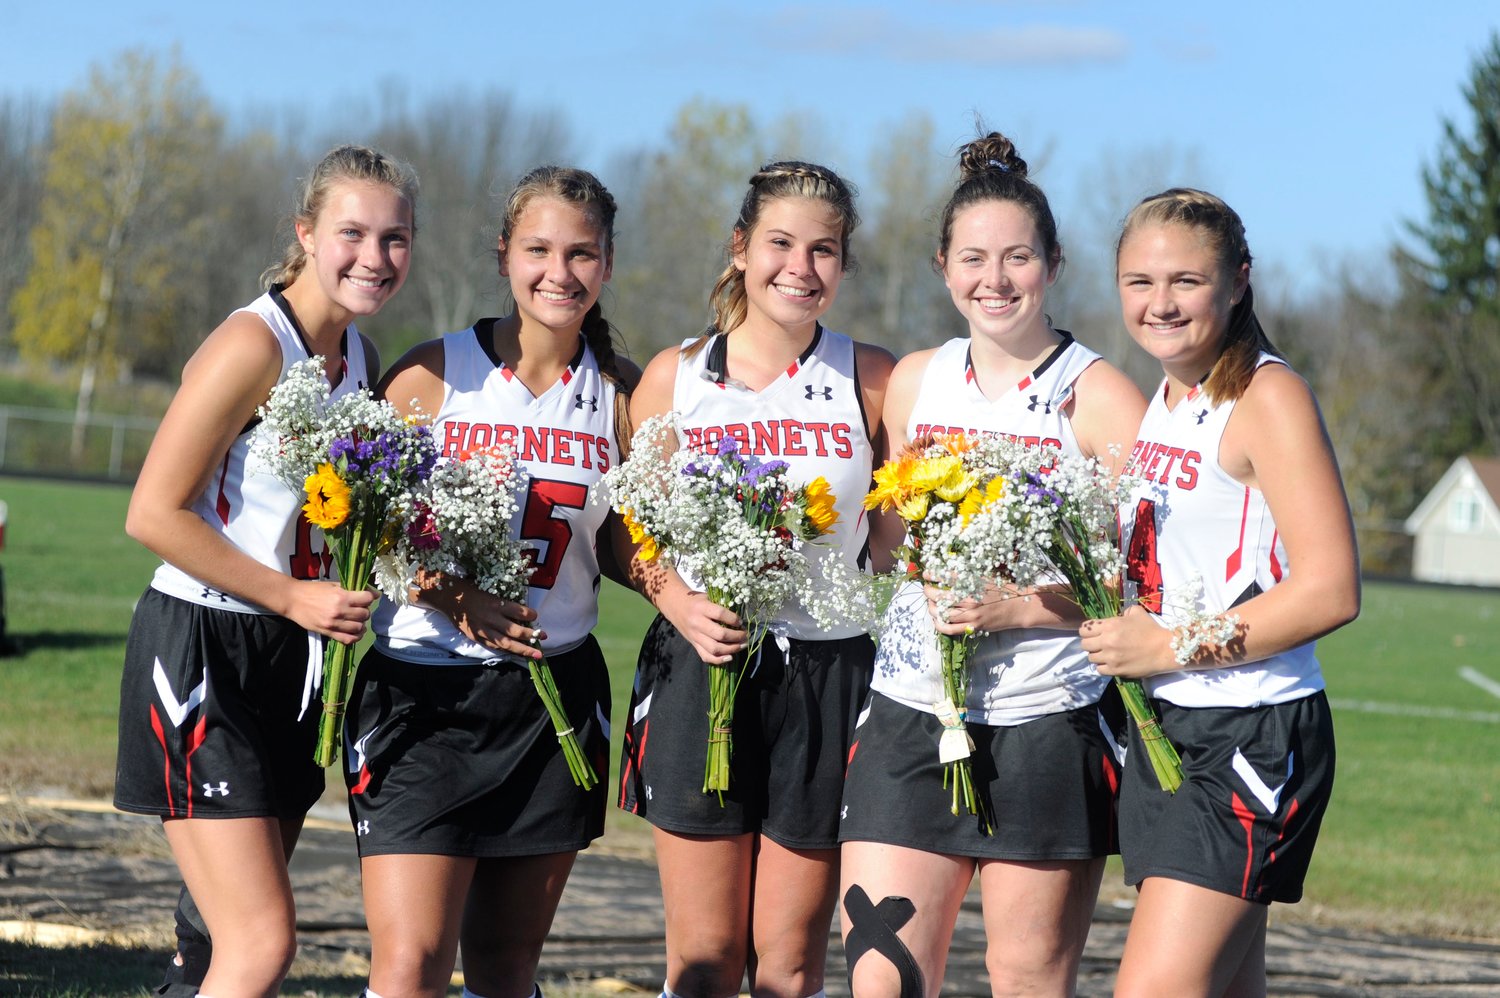 We are the seniors! Honesdale’s senior field hockey scholar-athletes played their final home game at the Home of the Hornets. Pictured are Leah Krol (scored the second goal of the match), left, Gina Dell’Aquila, Brynn McGinnis, co-captain Grace Maxson and co-captain Sarah Meyer, who posted her team’s first goal.